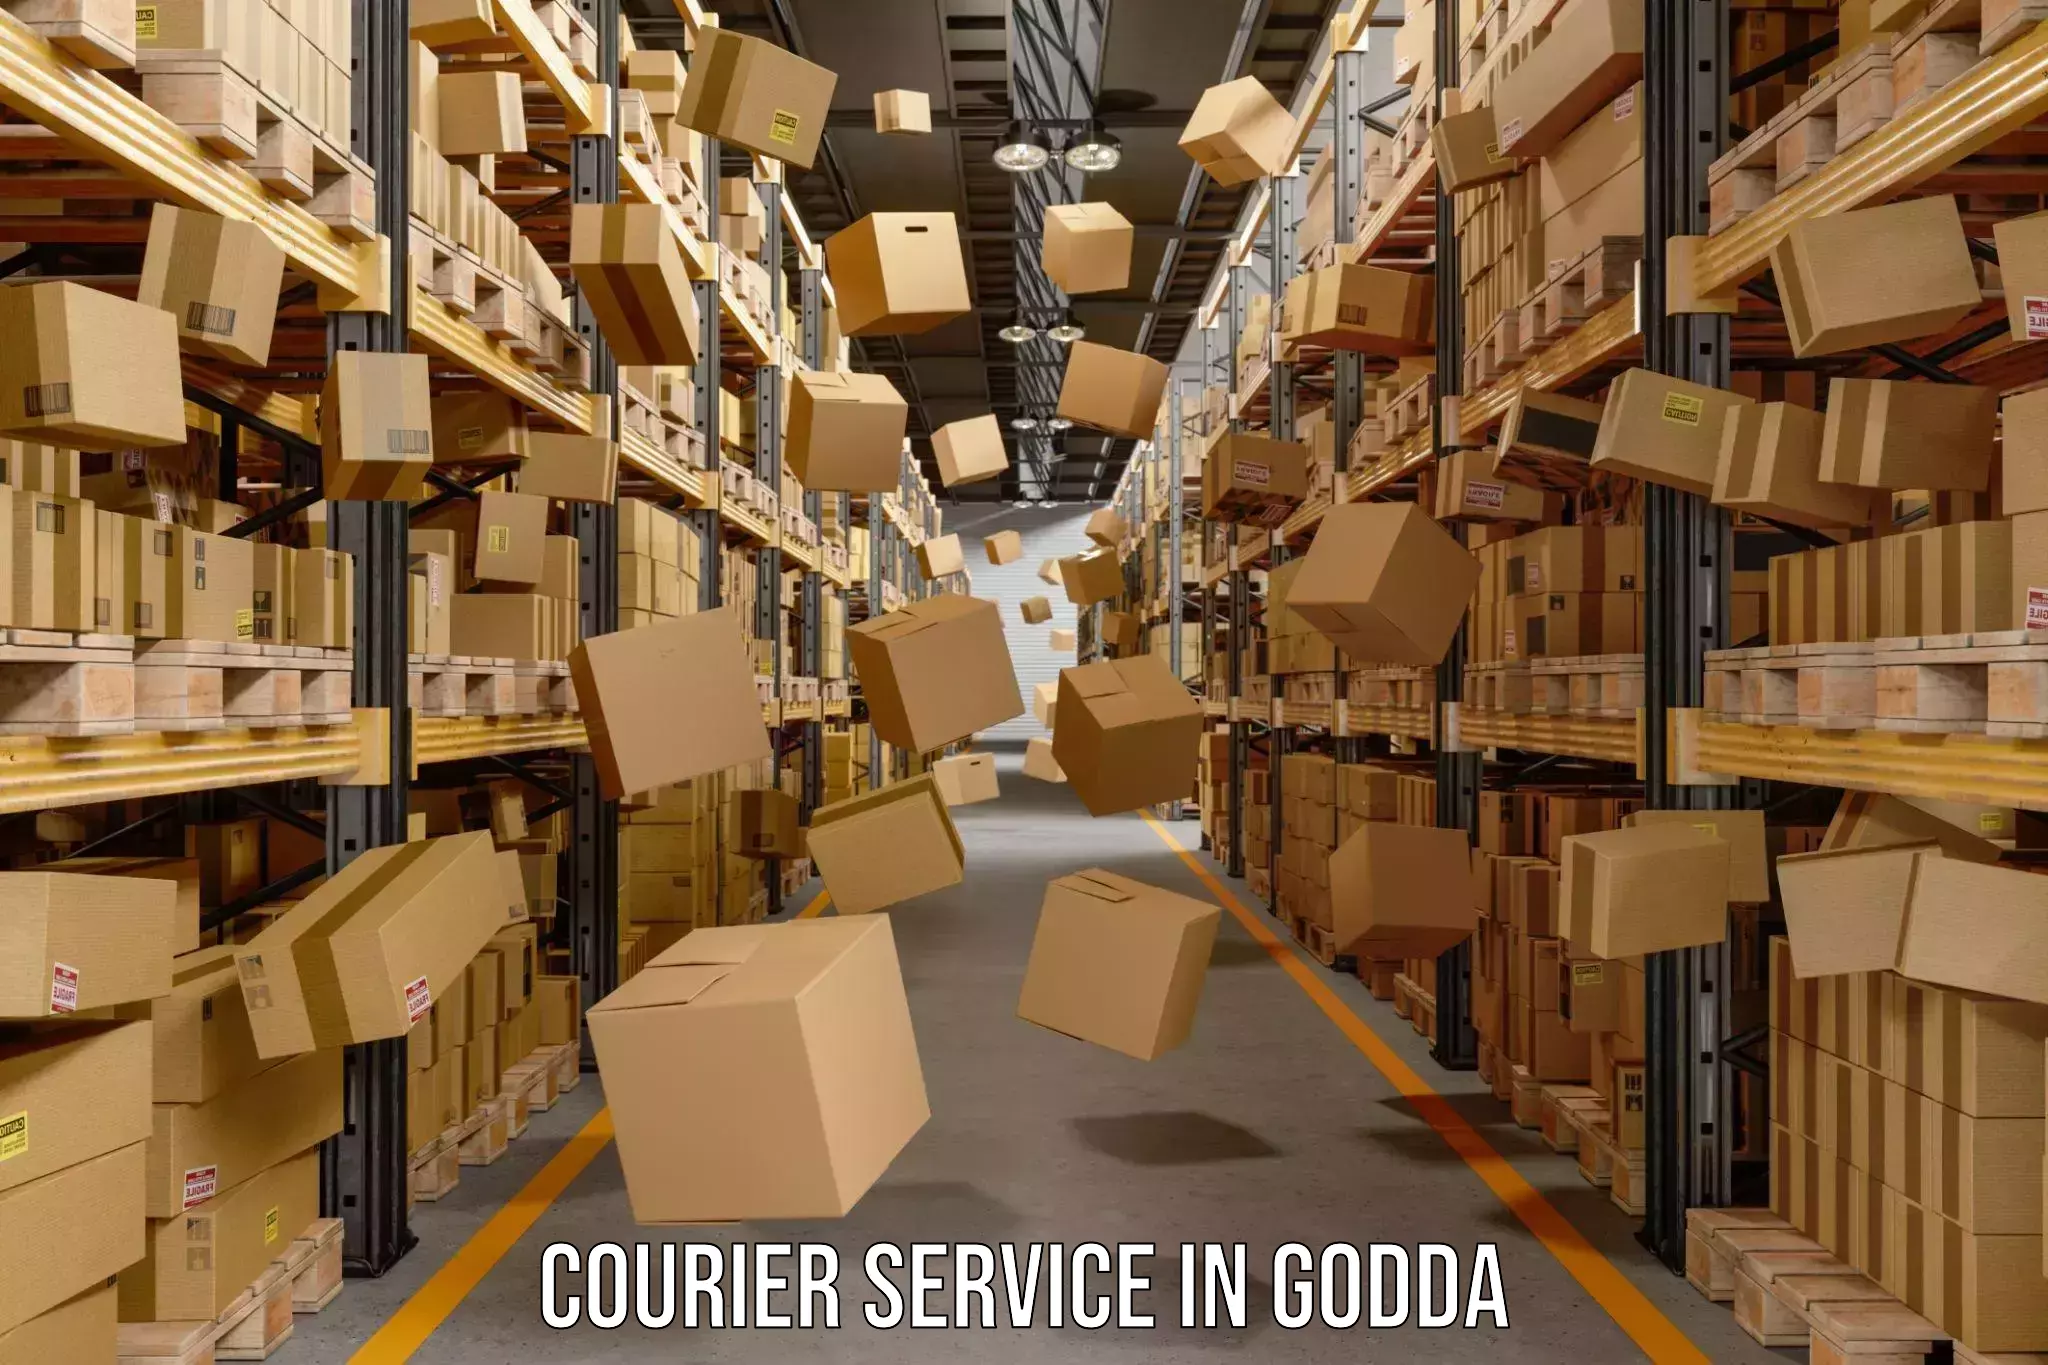 Sustainable shipping practices in Godda